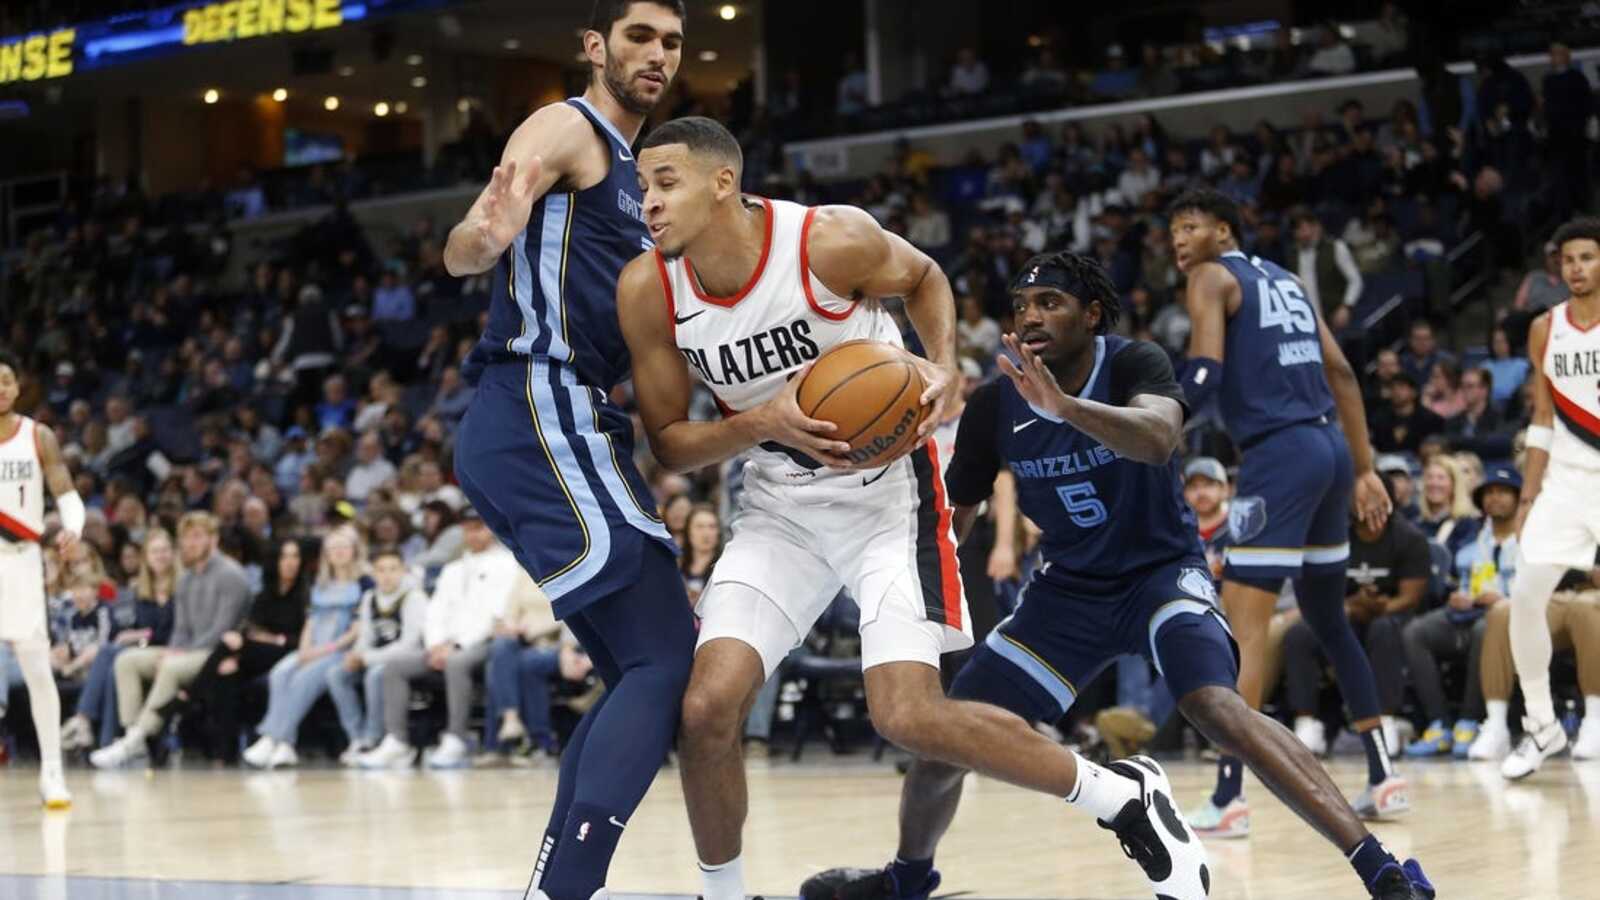 Blazers end 9-game skid in big way, blow out Grizzlies